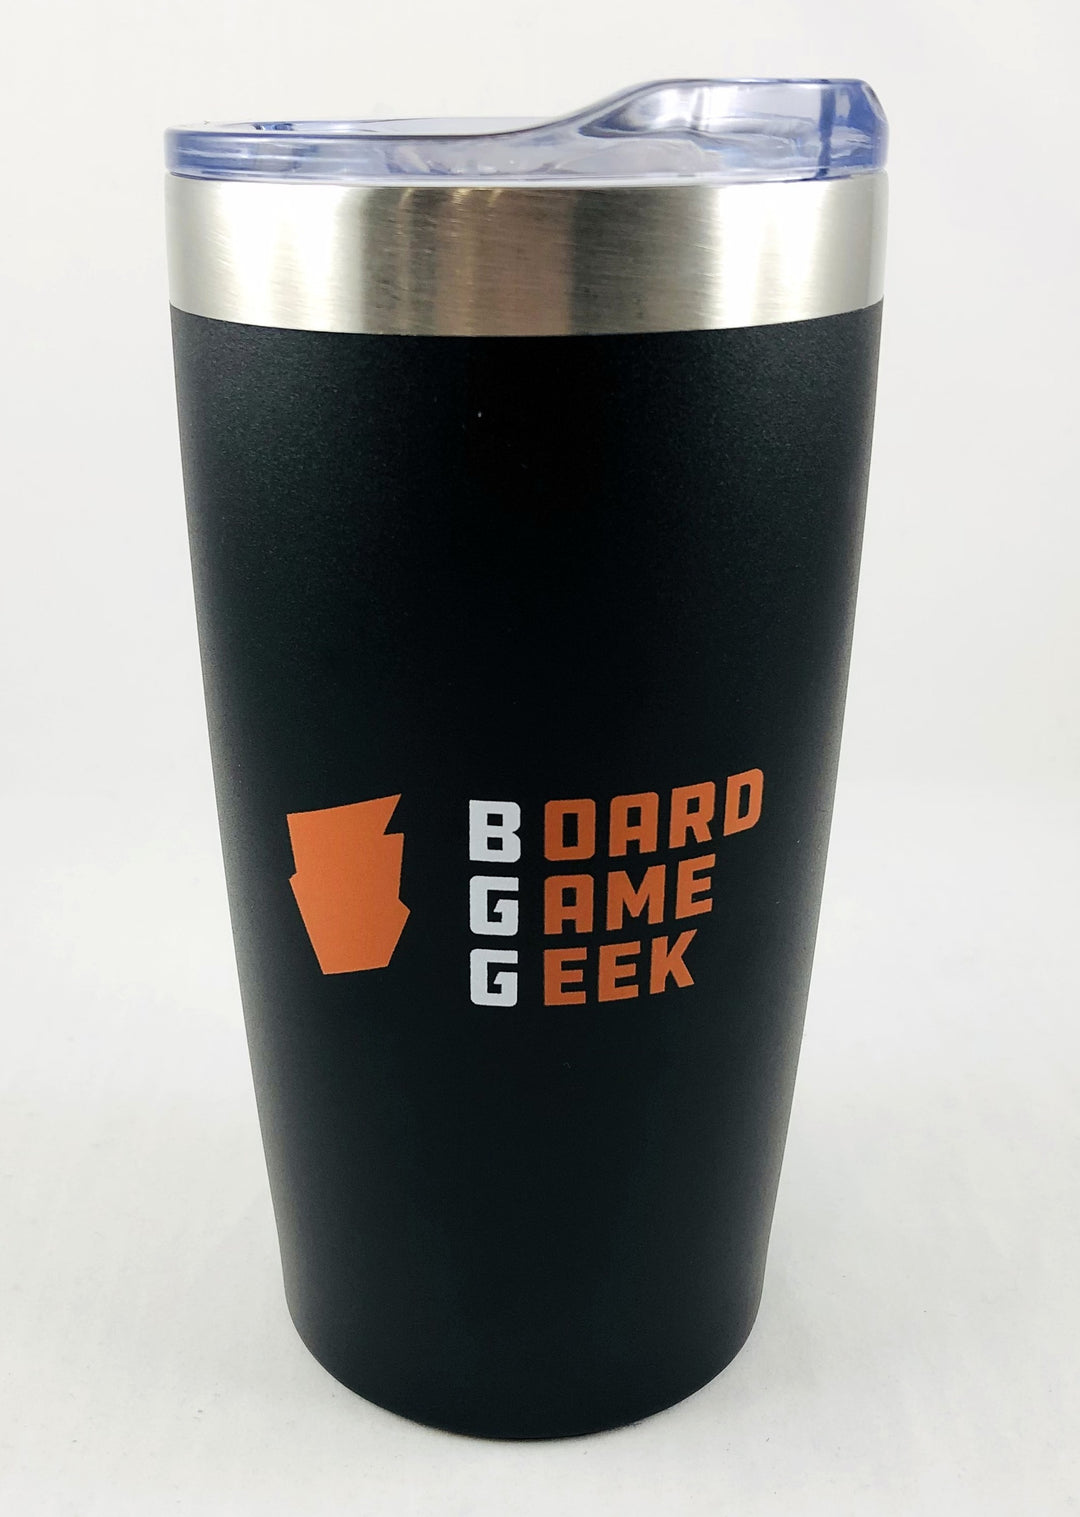 A black and silver travel mug, with a clear, push top above the silver rim. The mug is decorated with an orange logo and the words "BoardGameGeek".